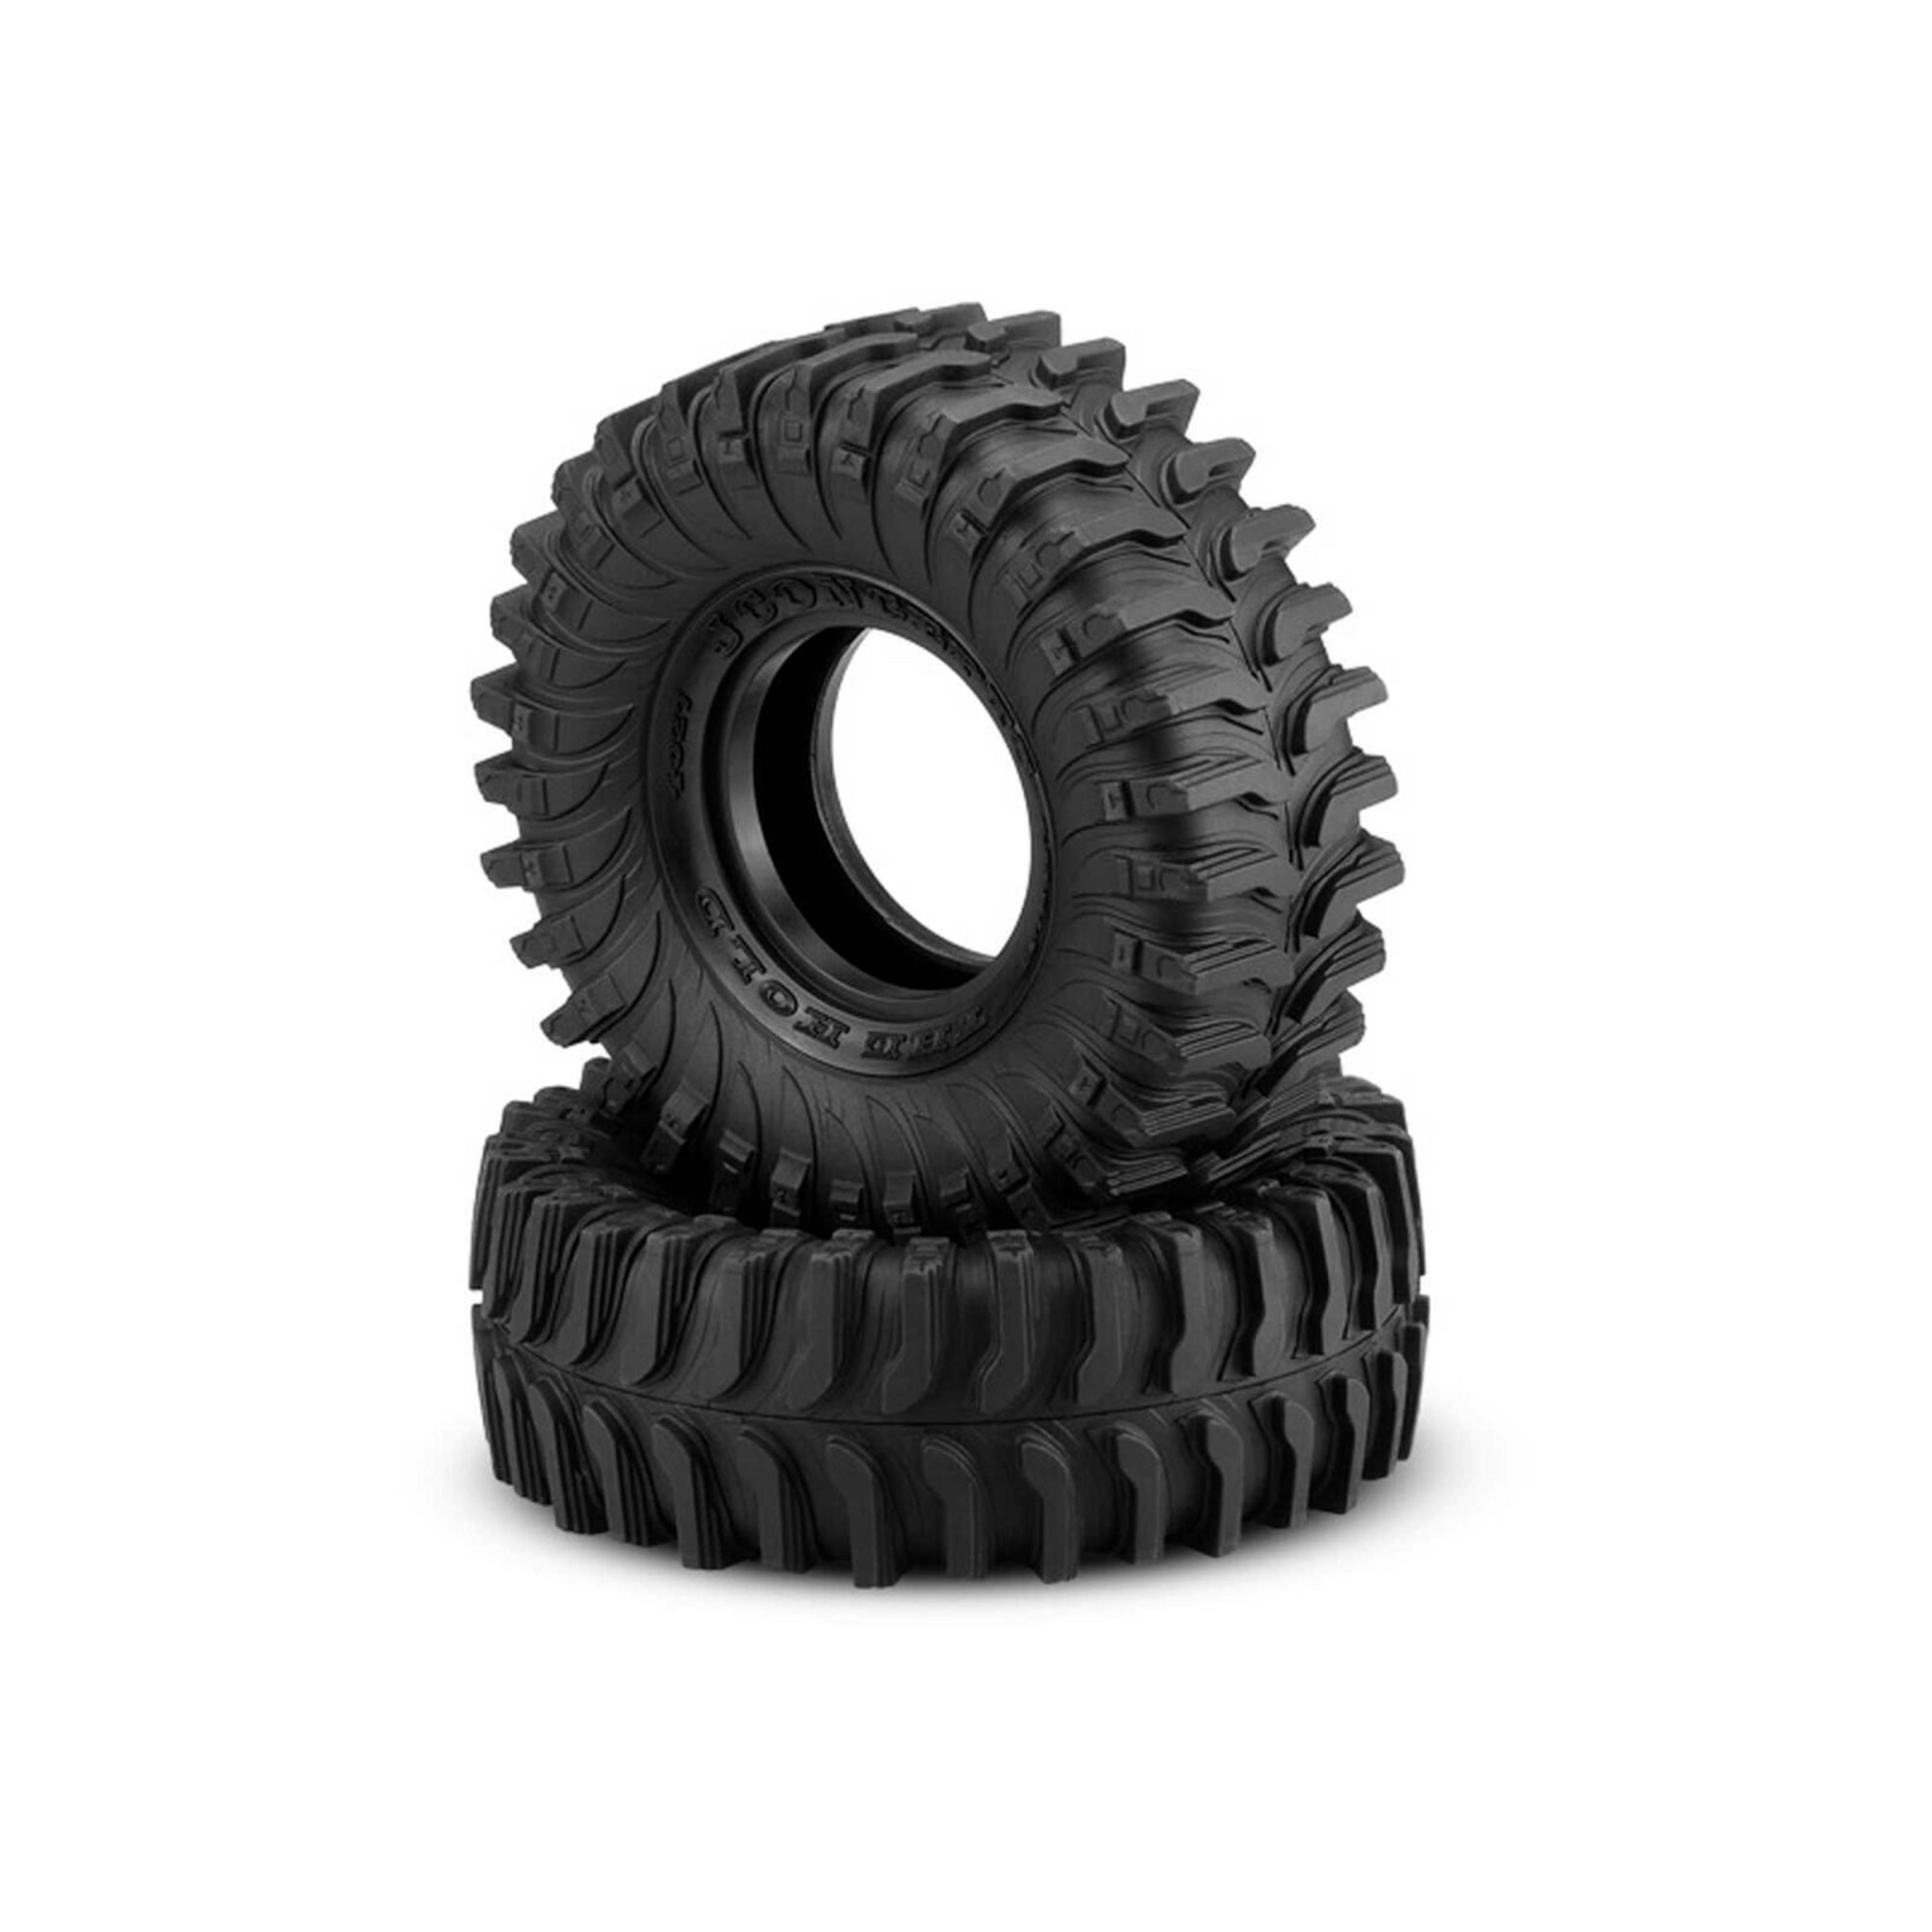 1/10 The Hold Performance Scaler 1.9in Crawler Tires w/ Inserts, Green Compound (1 Pair)